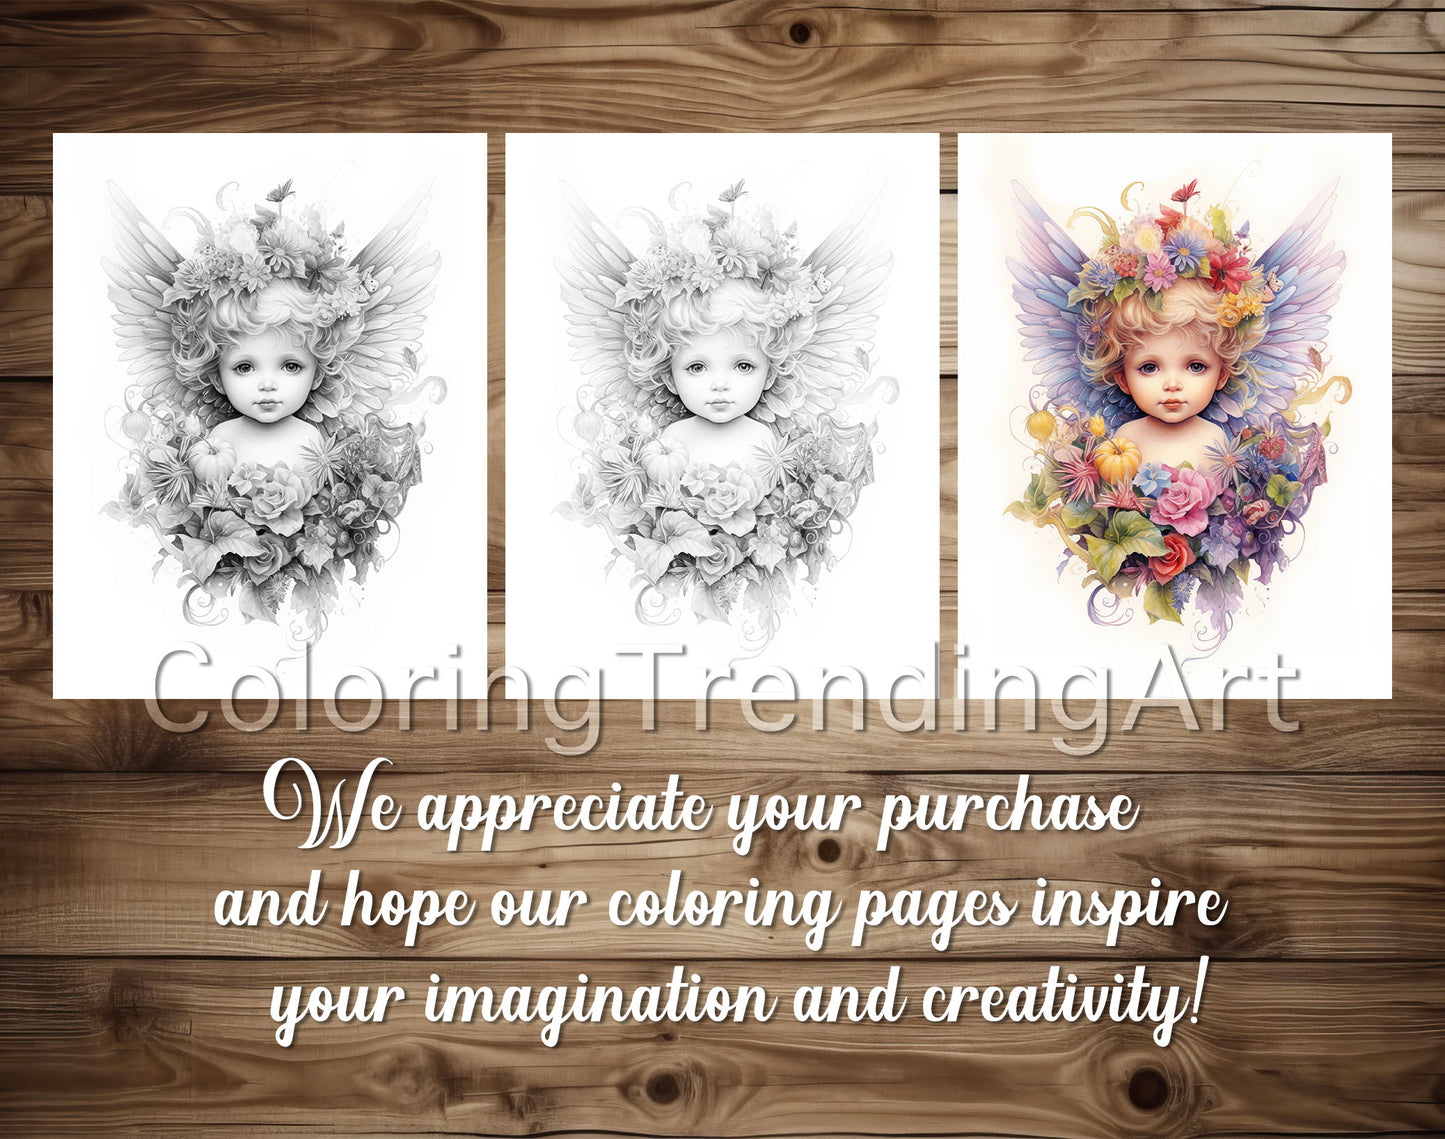 25 Adorable Baby Angels Grayscale Coloring Pages - Instant Download - Printable PDF - TrendingColoring